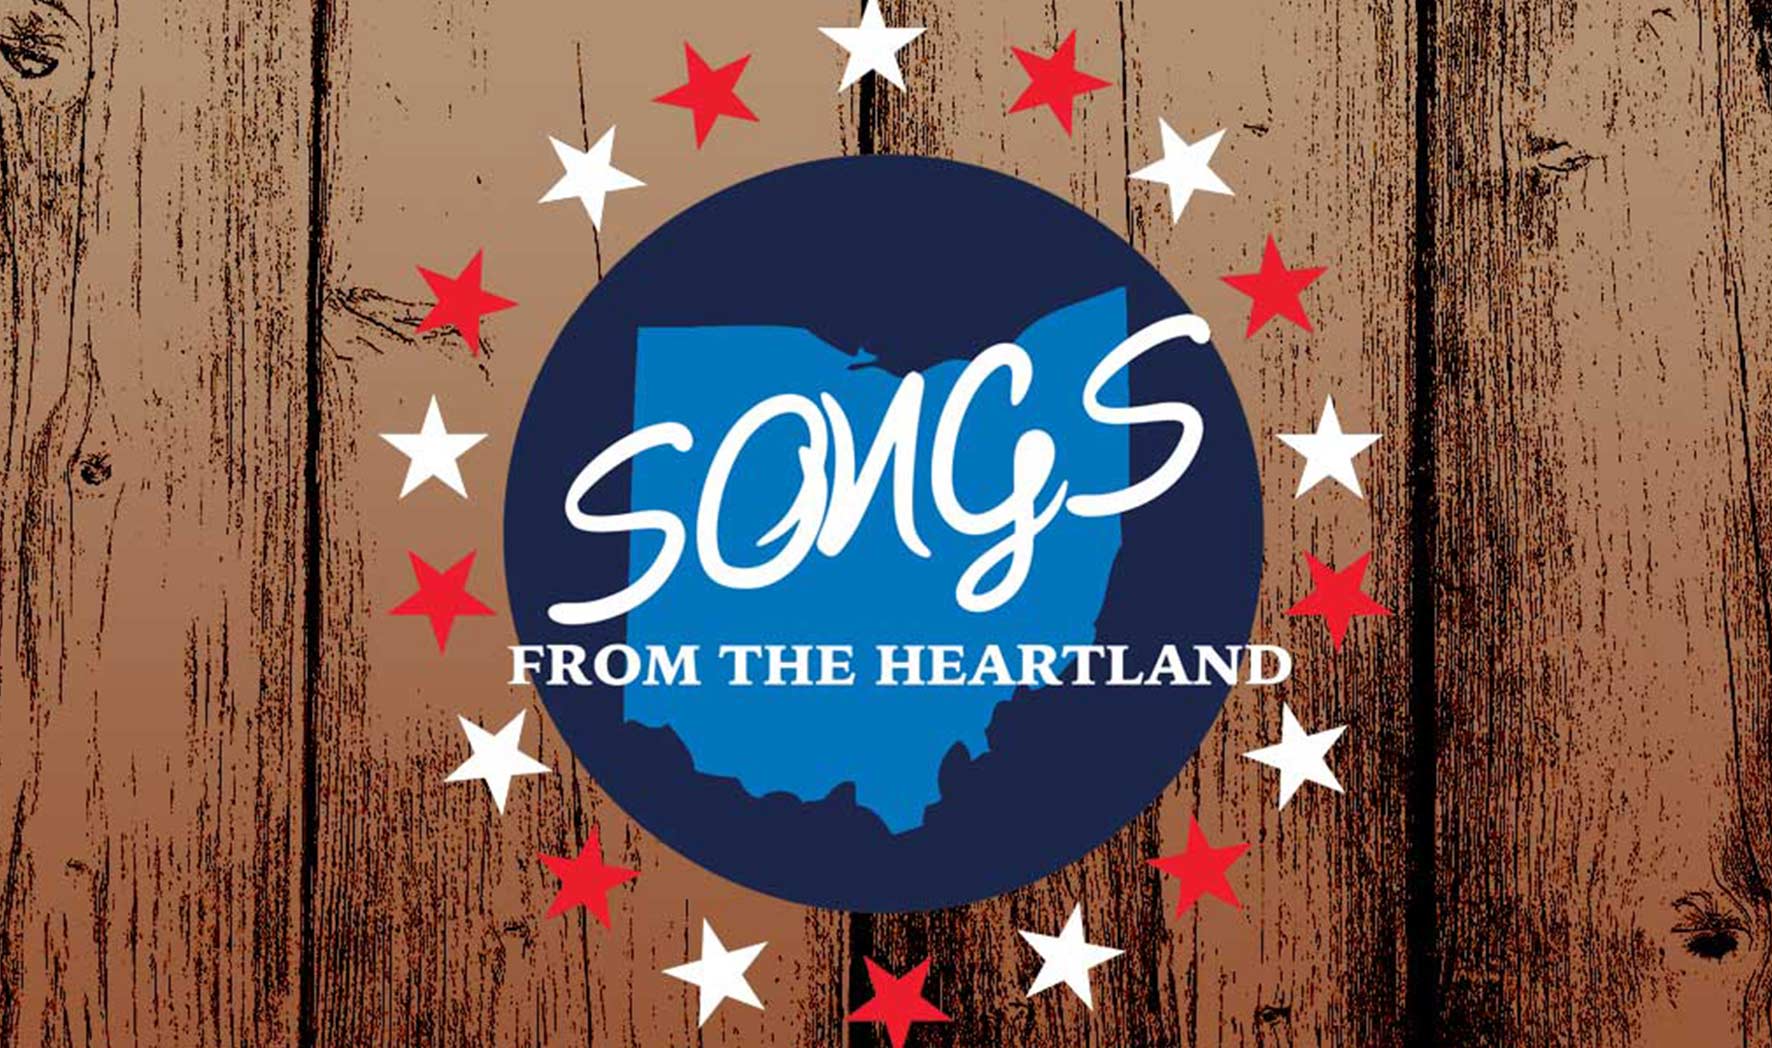 Songs from the Heartland